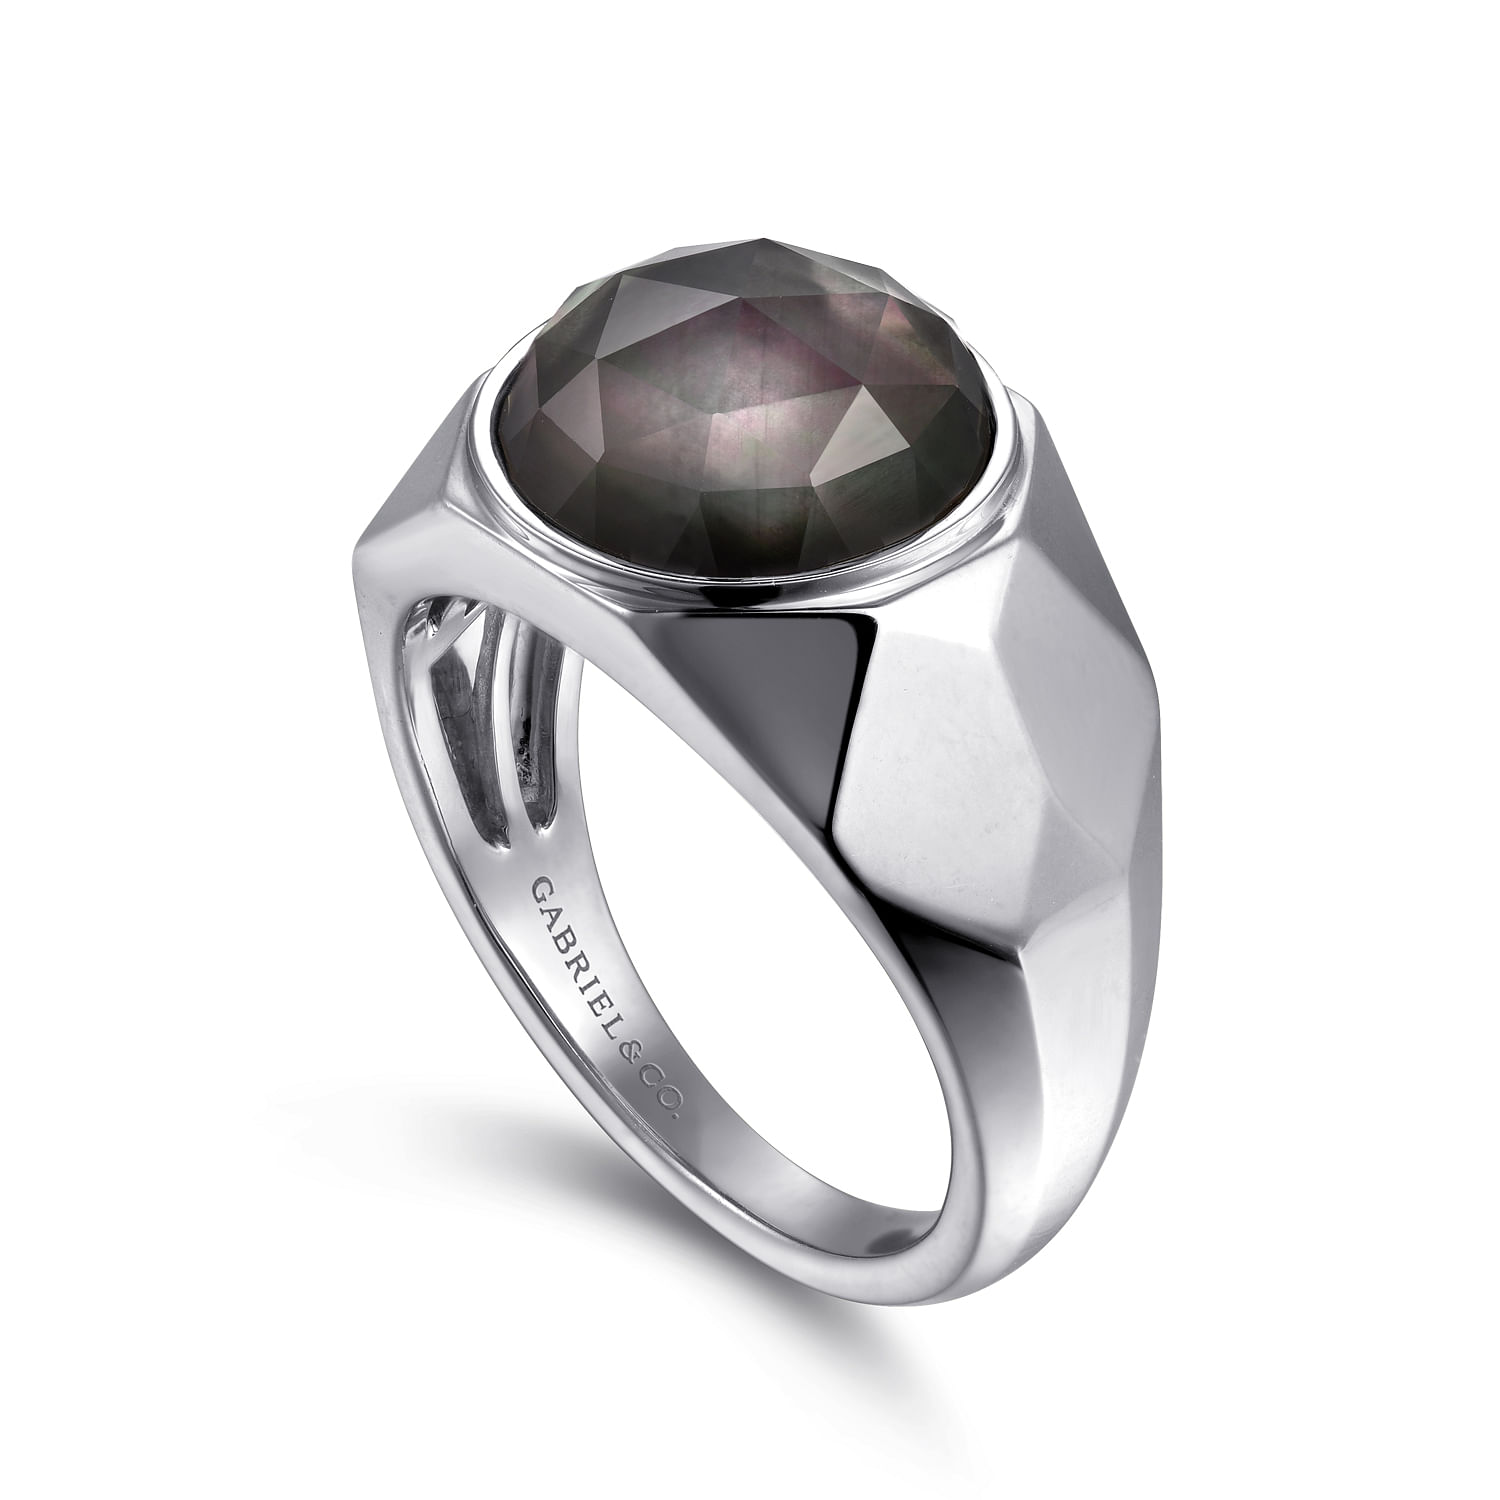 Wide 925 Sterling Silver Signet Ring with Black Mother of Pearl Stone in High Polished Finish - Shot 3